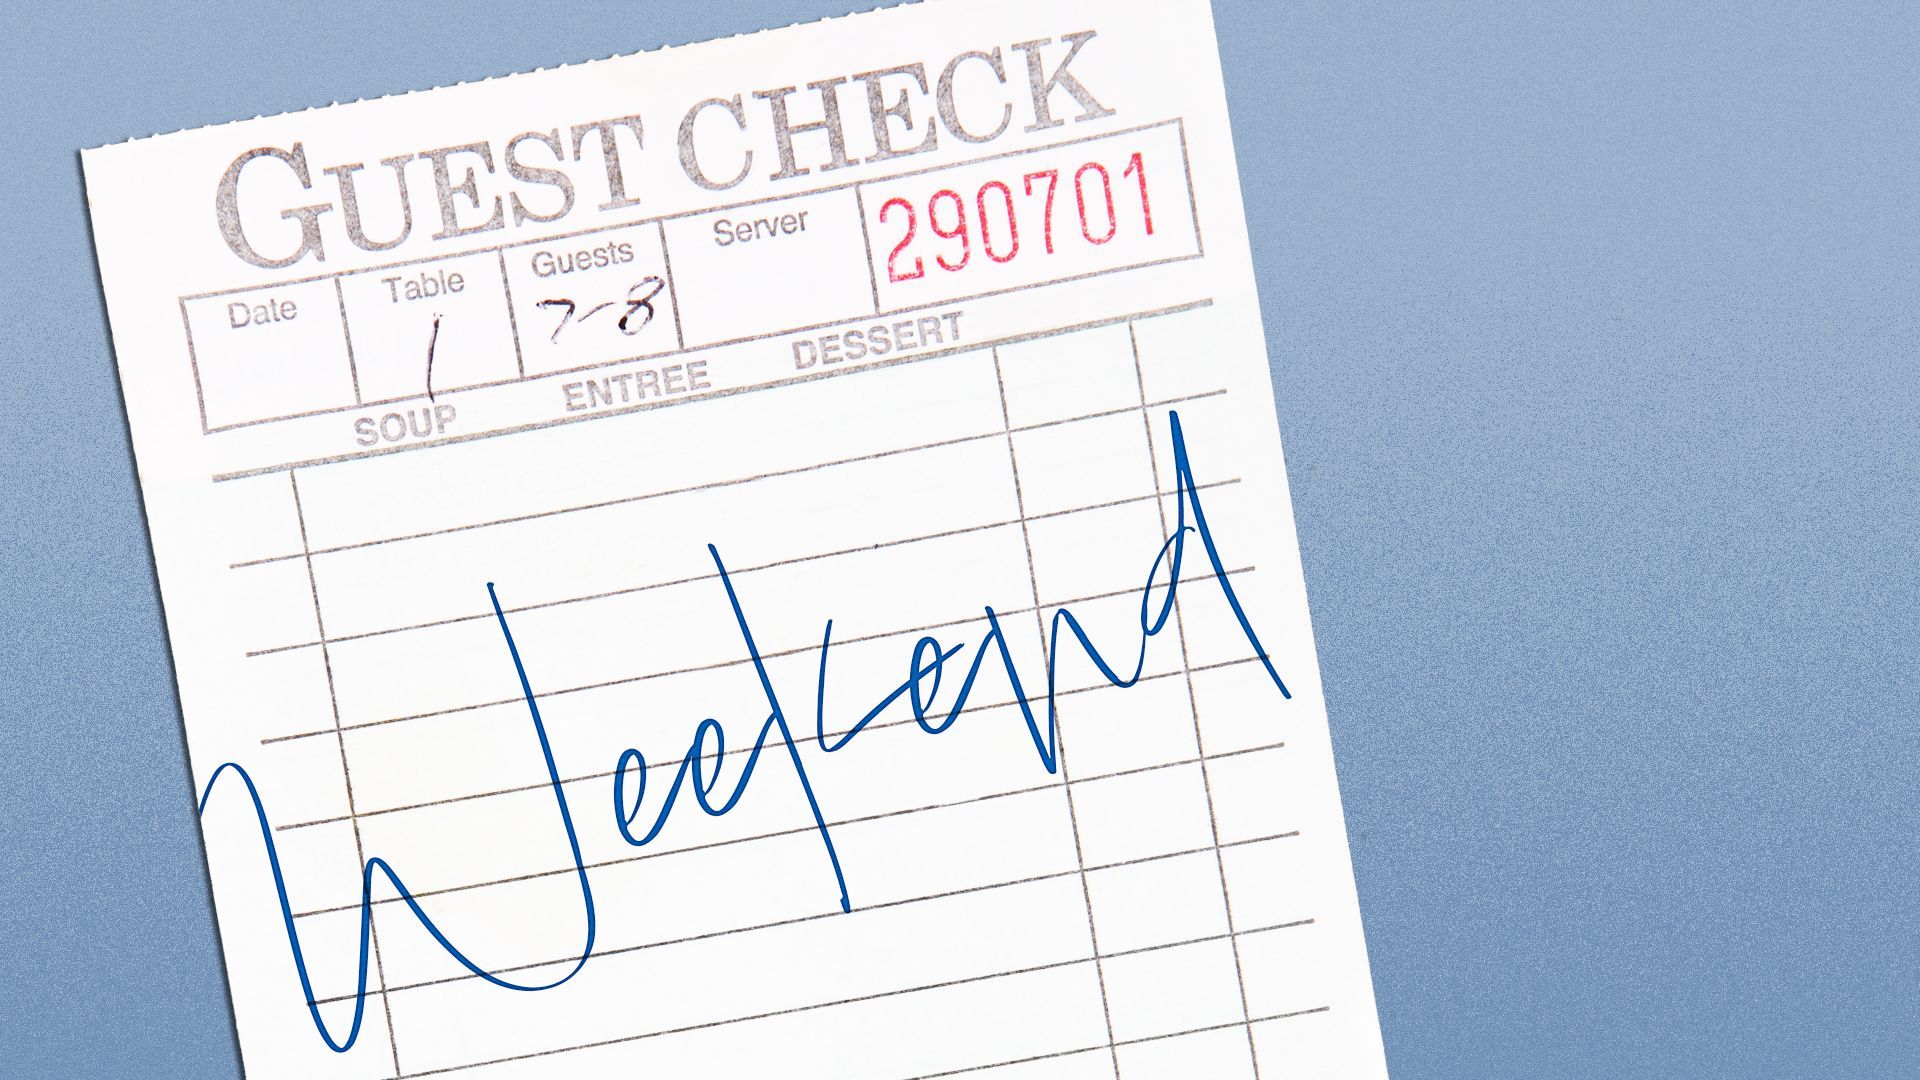 Illustration of a restaurant check with the word "weekend" scribbled on it. 